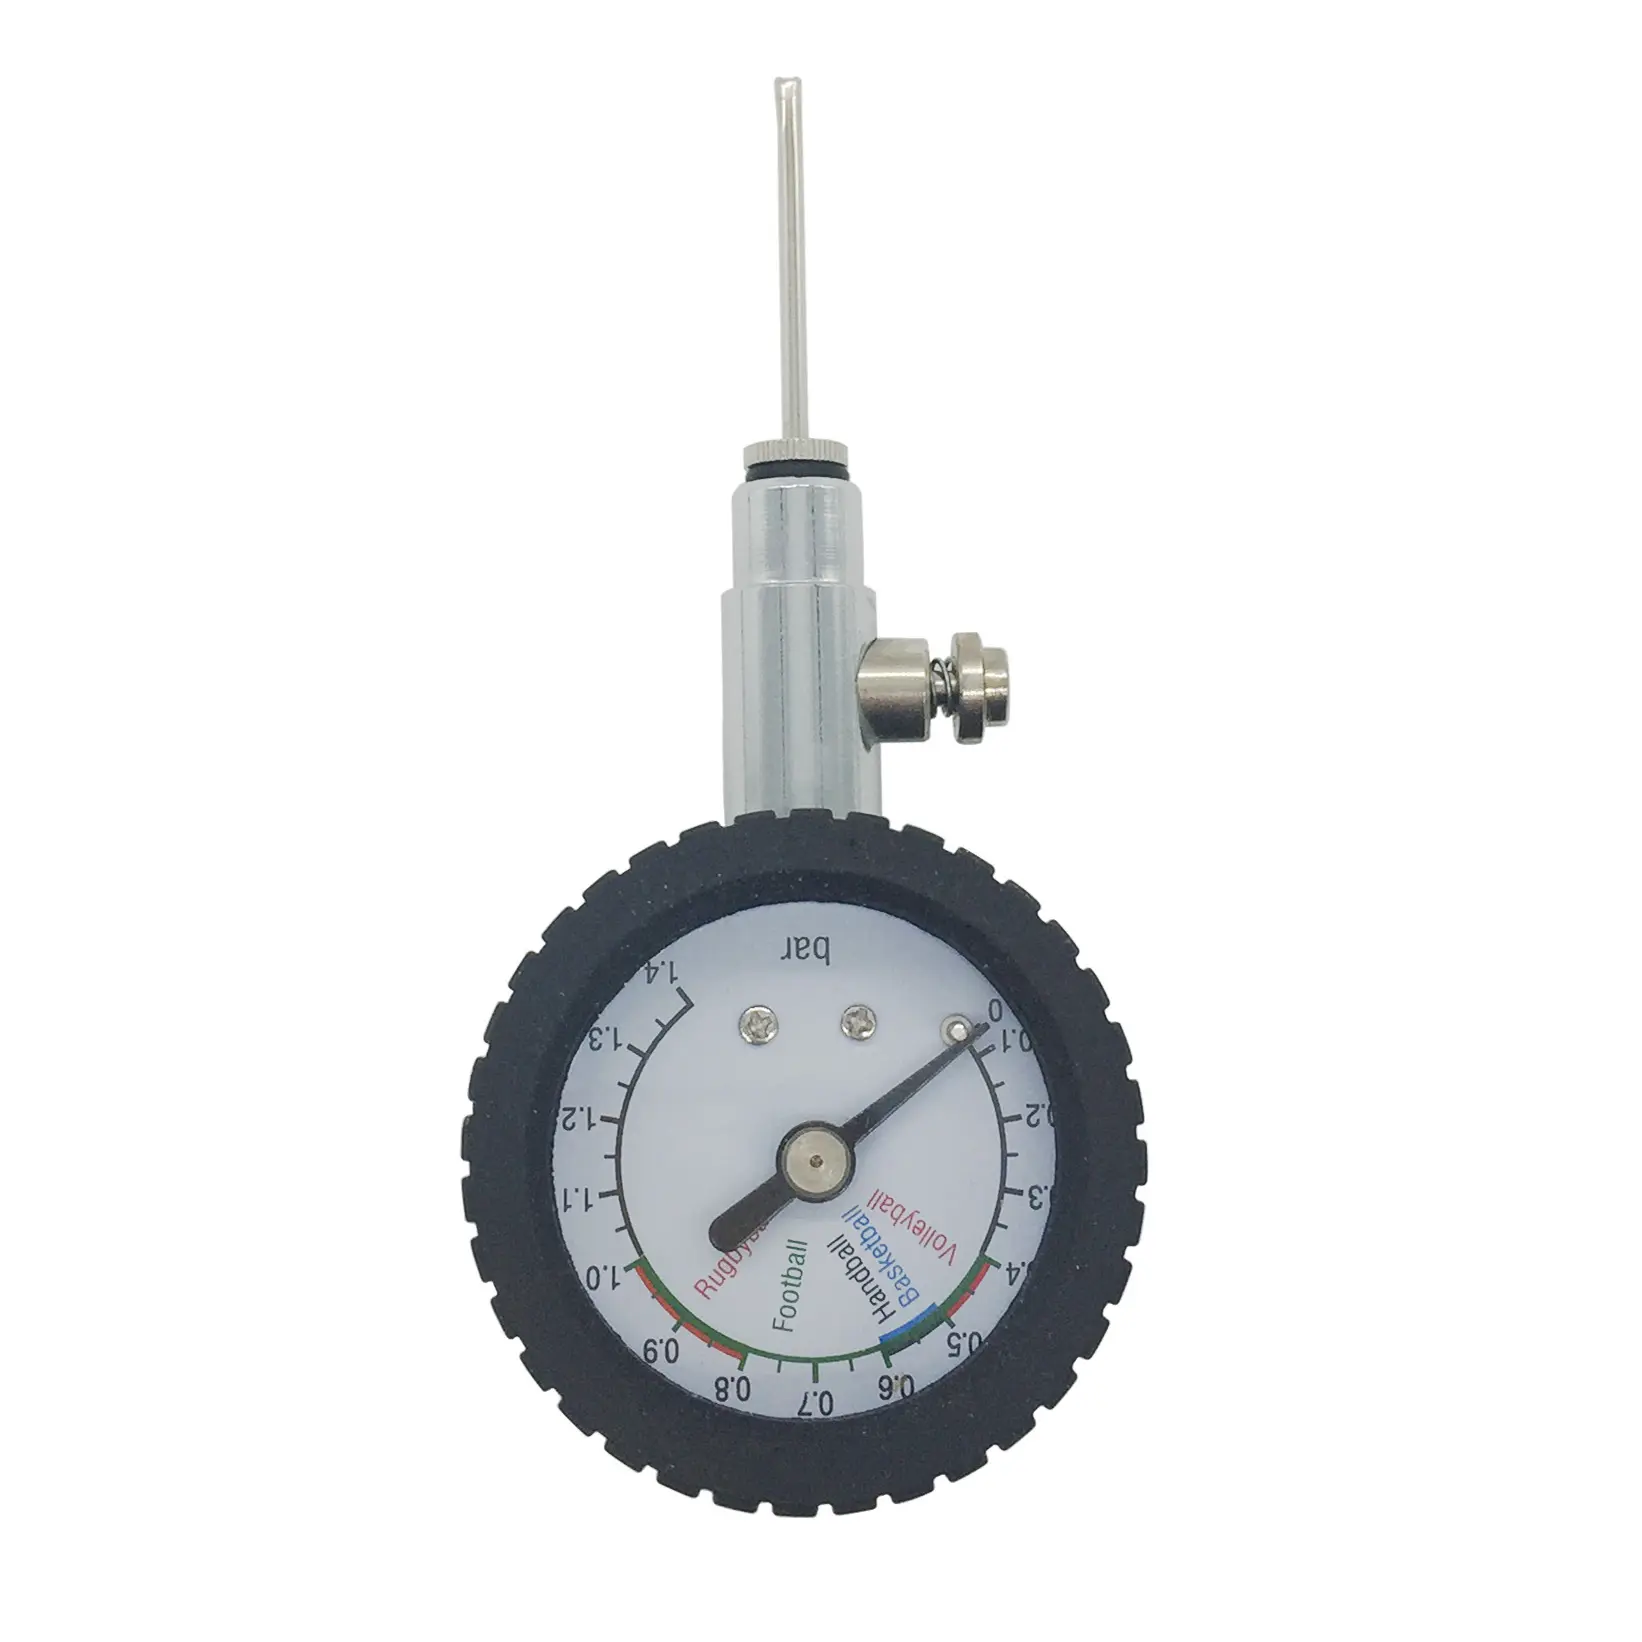 Accurate Ball Pressure Gauge Test and Adjust The Pressure for Football Soccer Rugby Basketball Volleyball